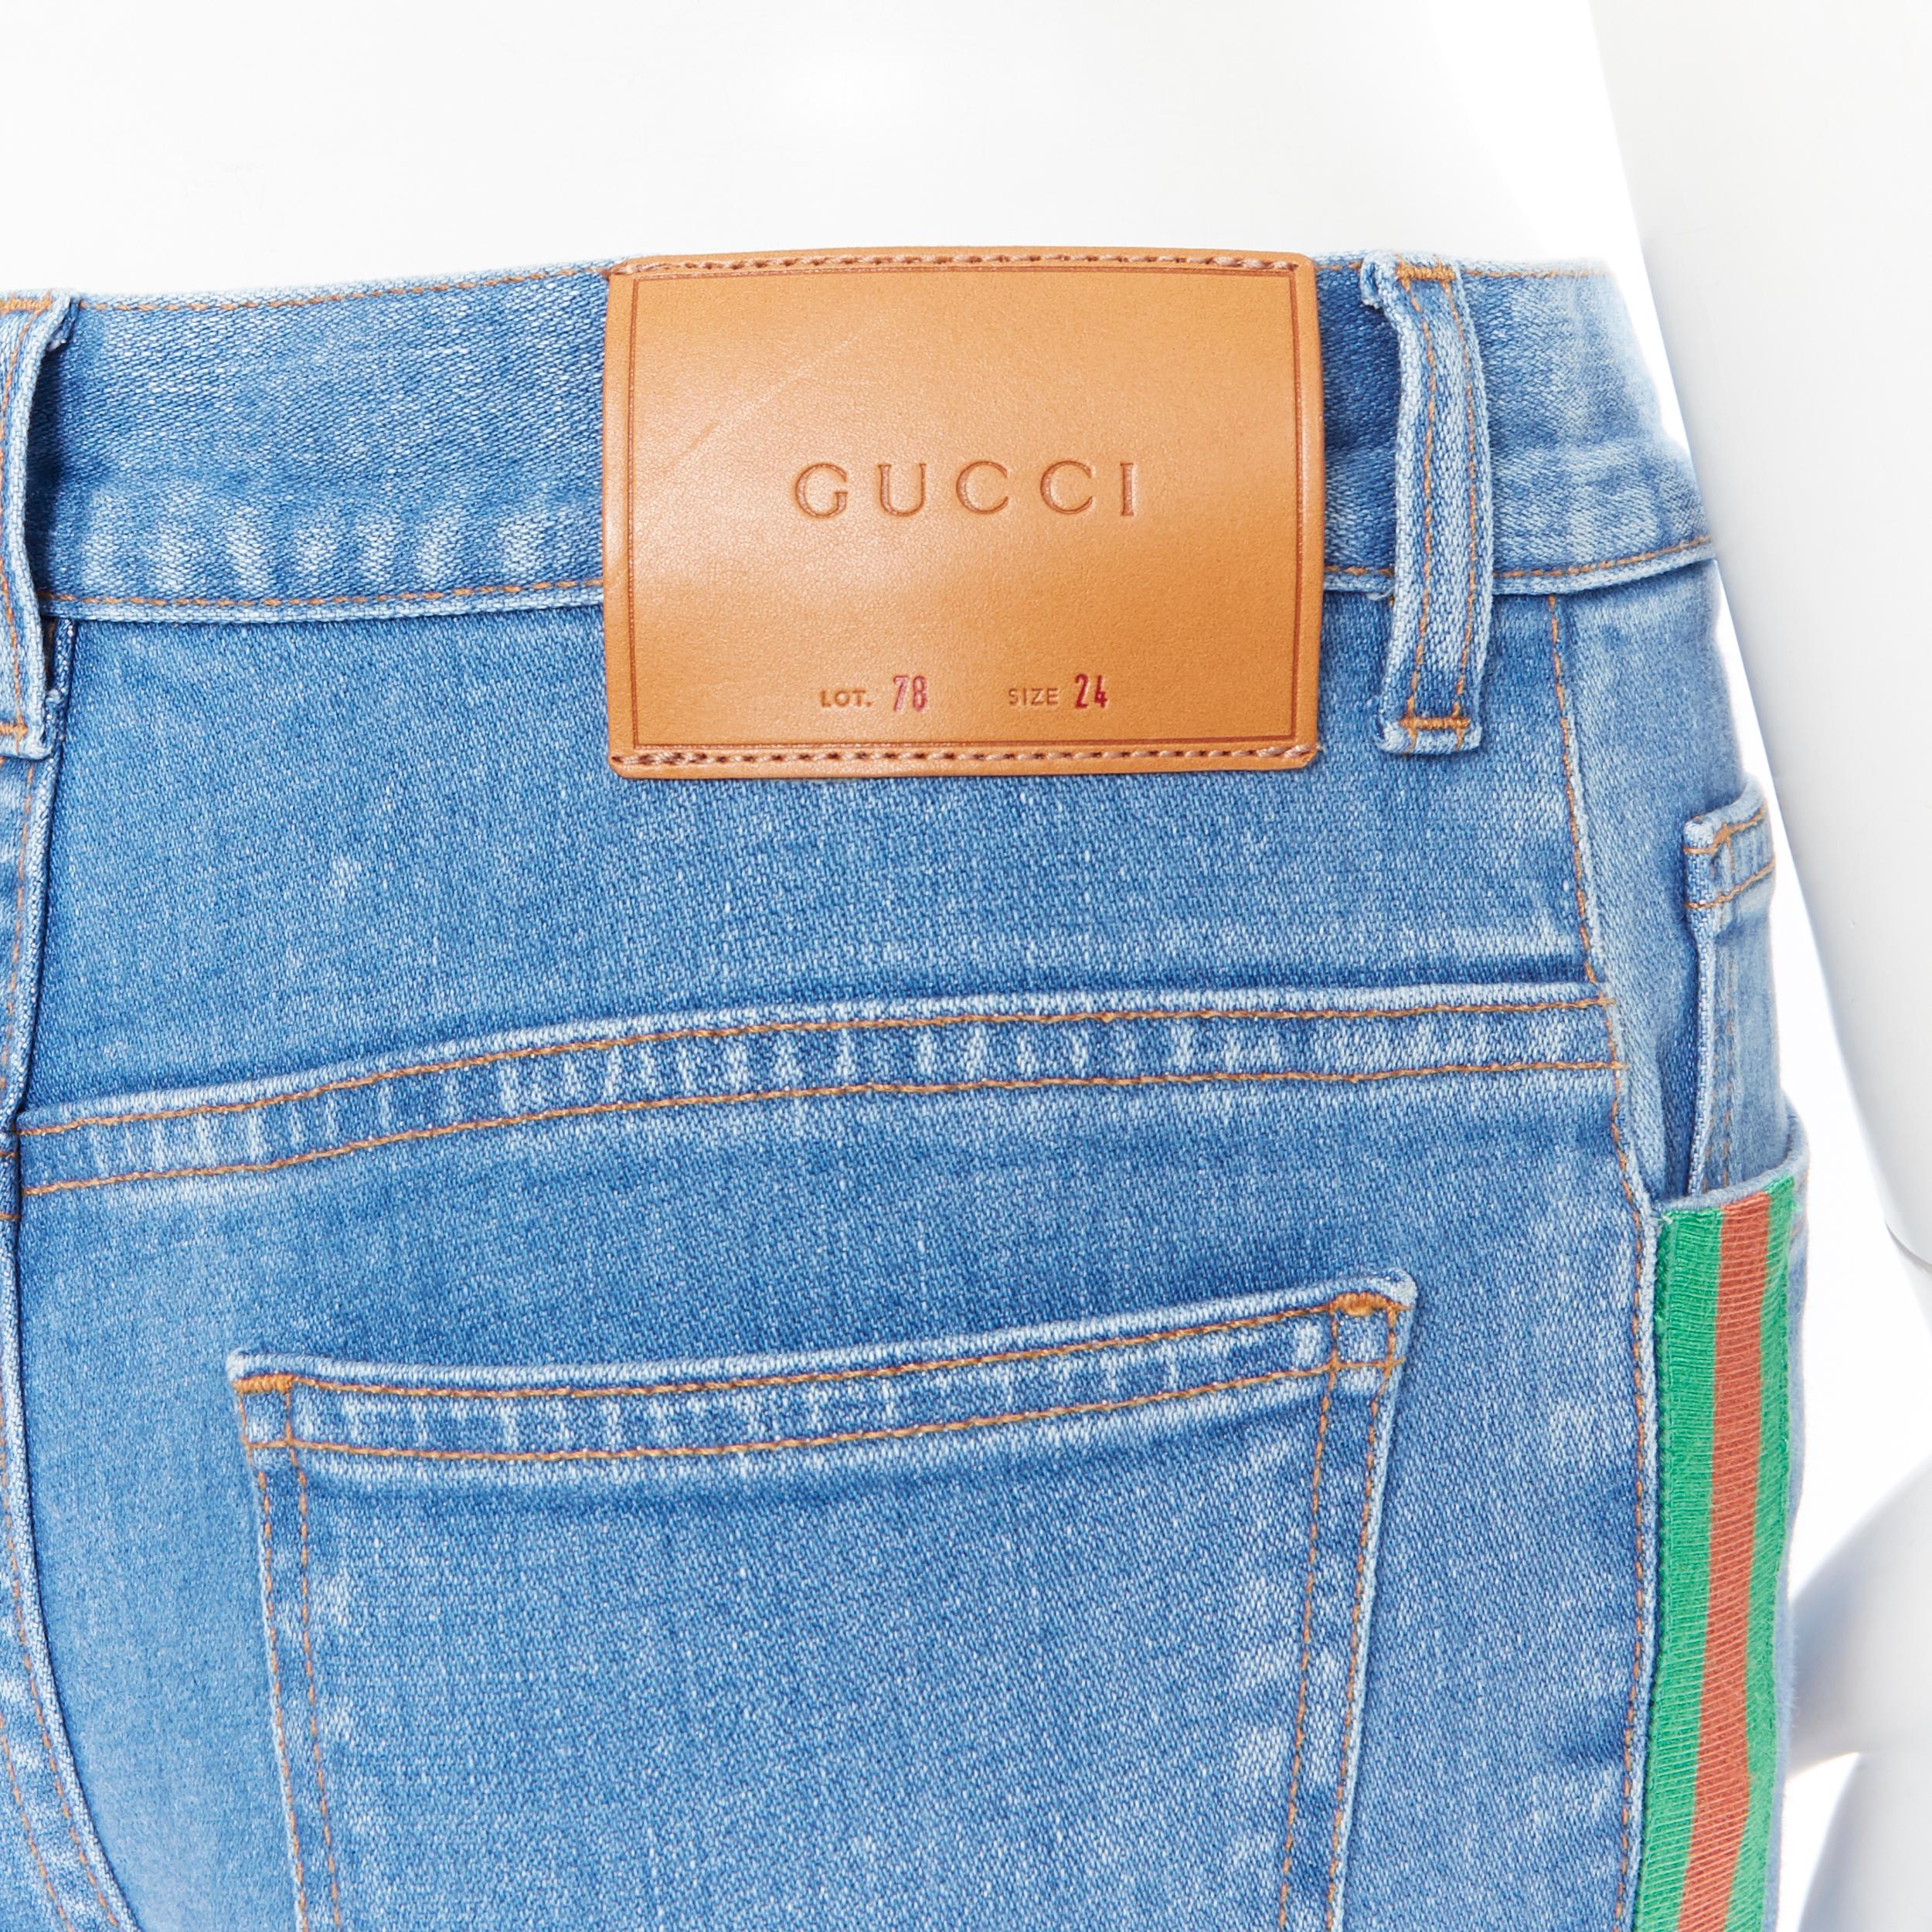 GUCCI ALESSANDRO MICHELE  blue denim red green web trim 90's flared jeans 24